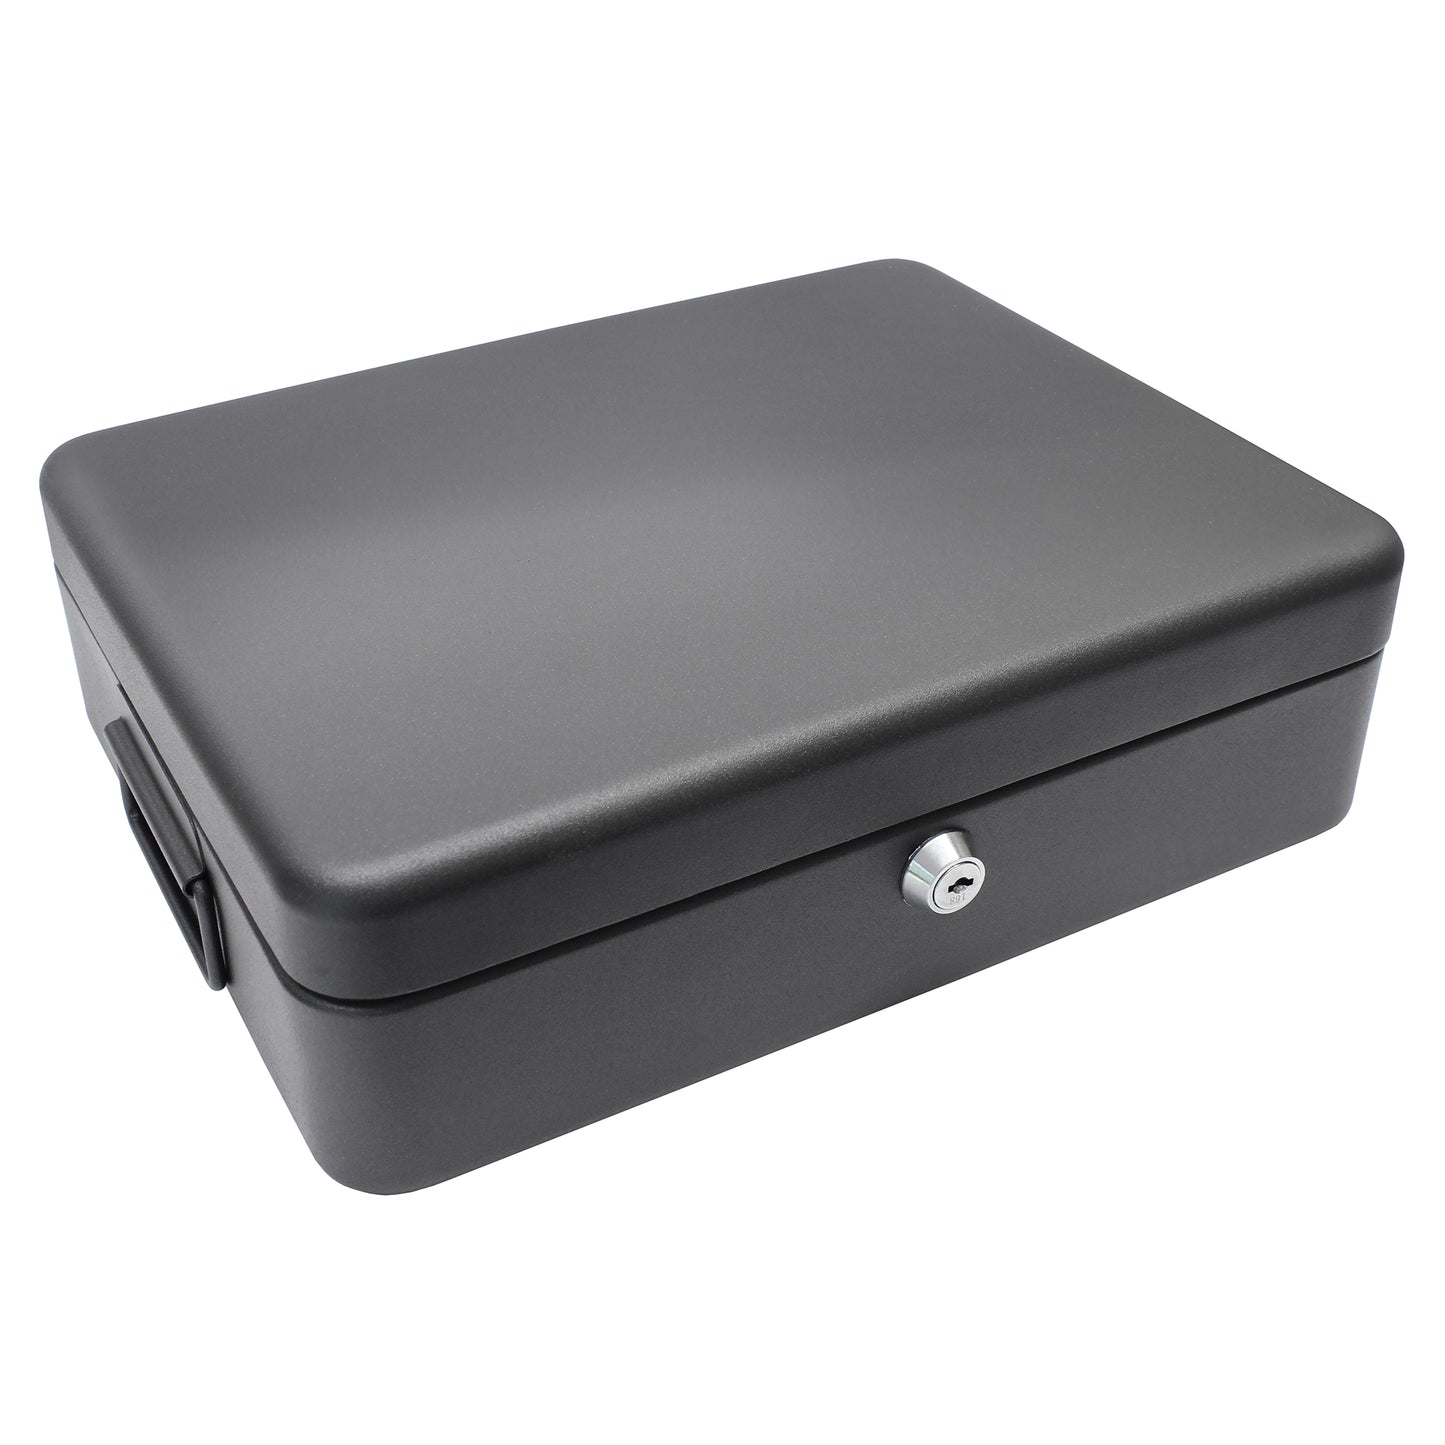 12 Inch Security Box